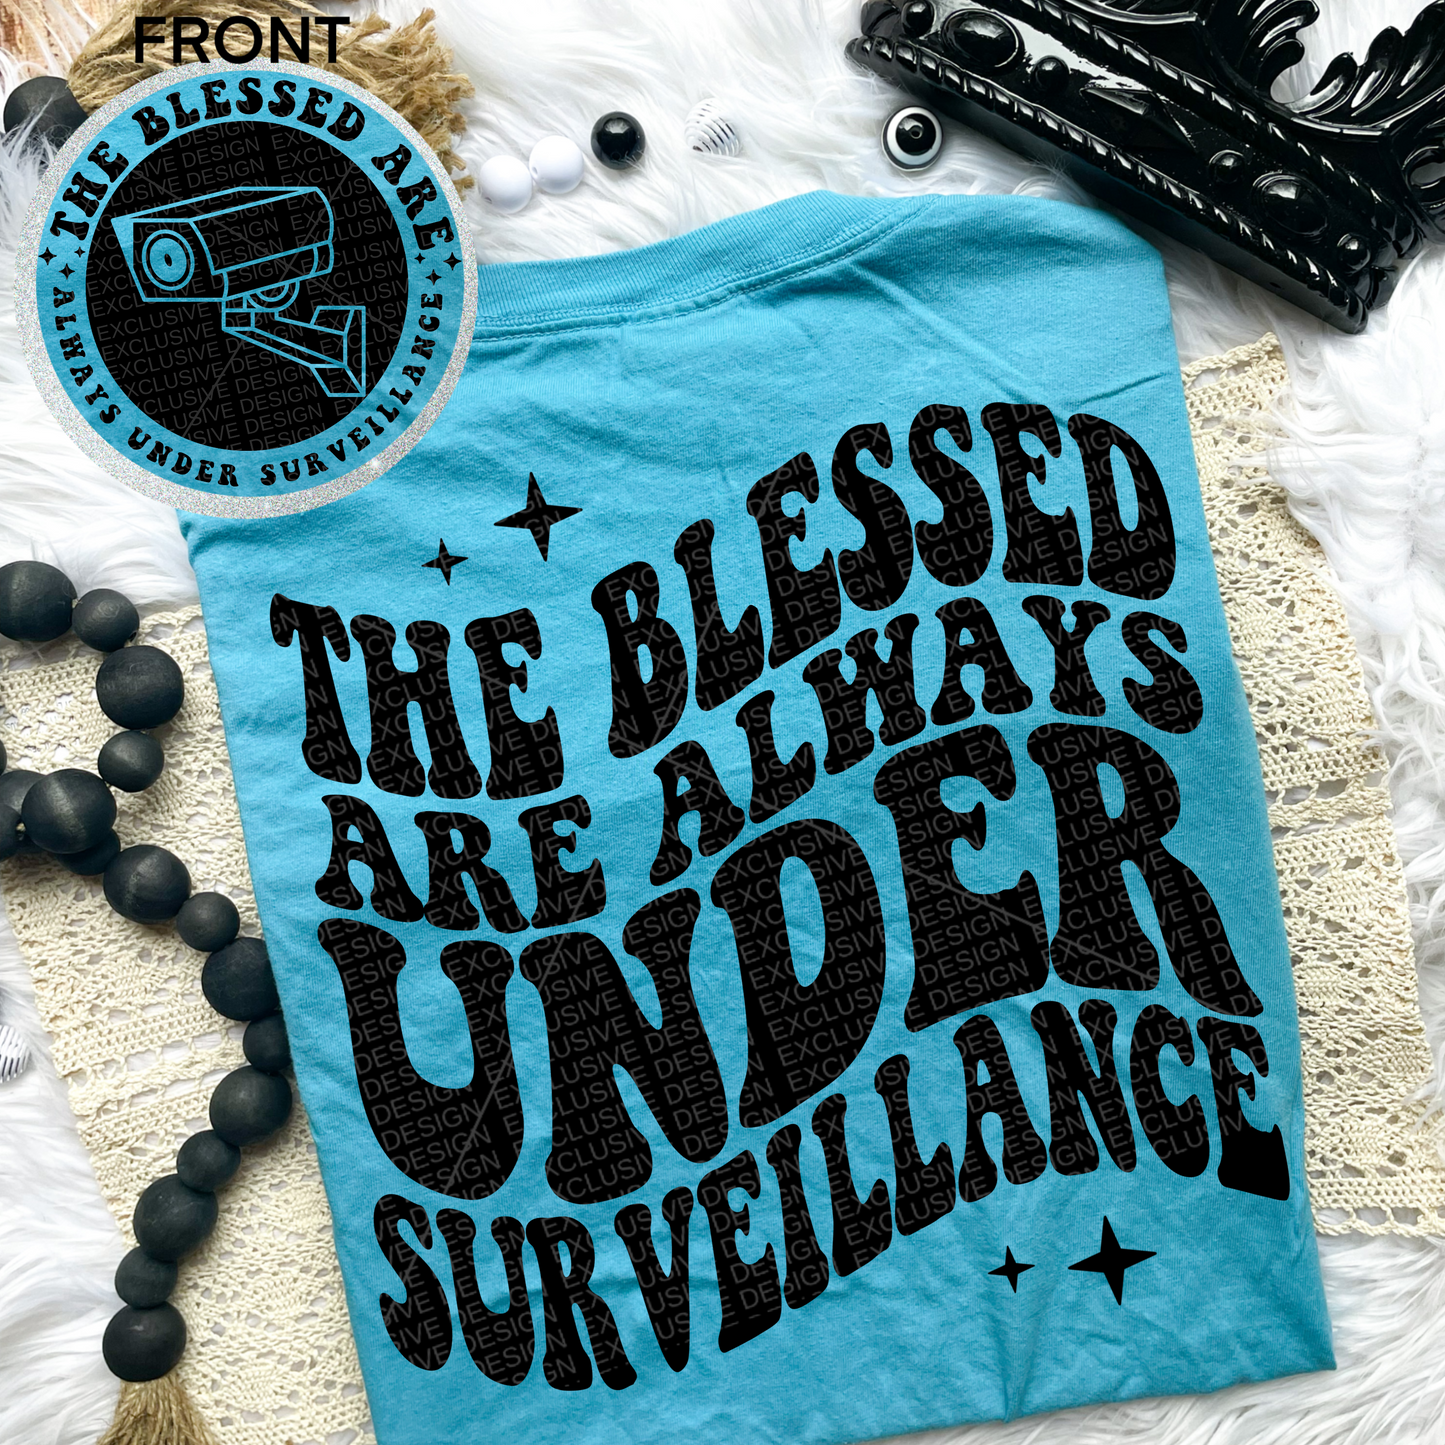 The Blessed Are Always Under Surveillance Comfort Colors Tee*